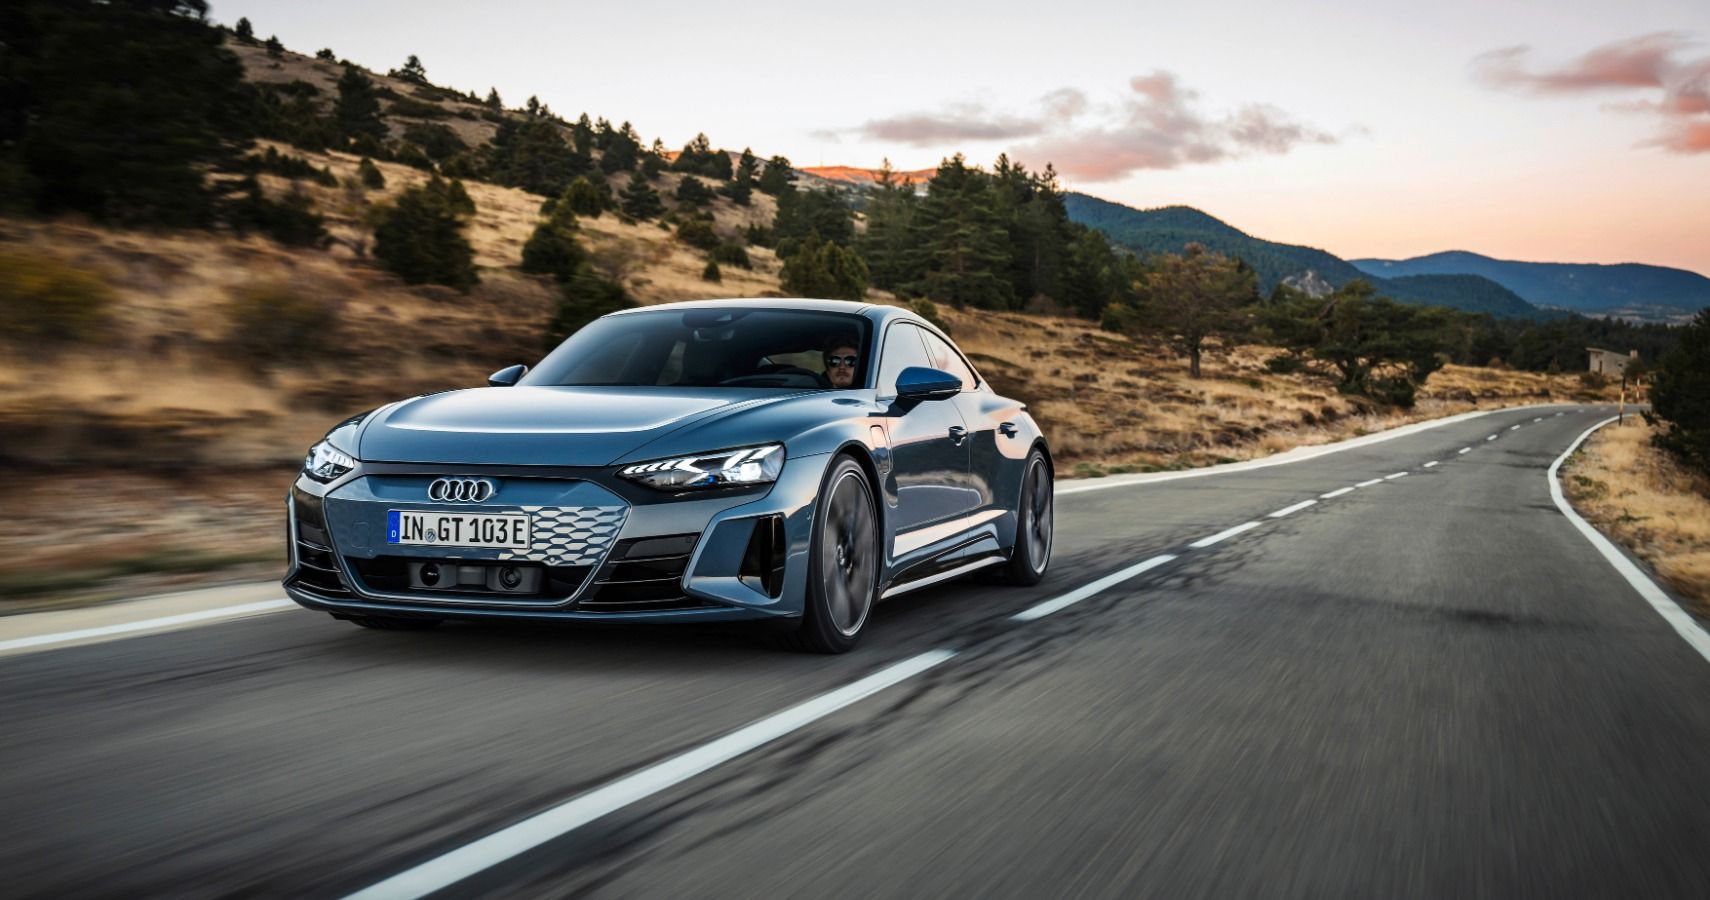 The Audi e-tron GT speeds up on the road. 